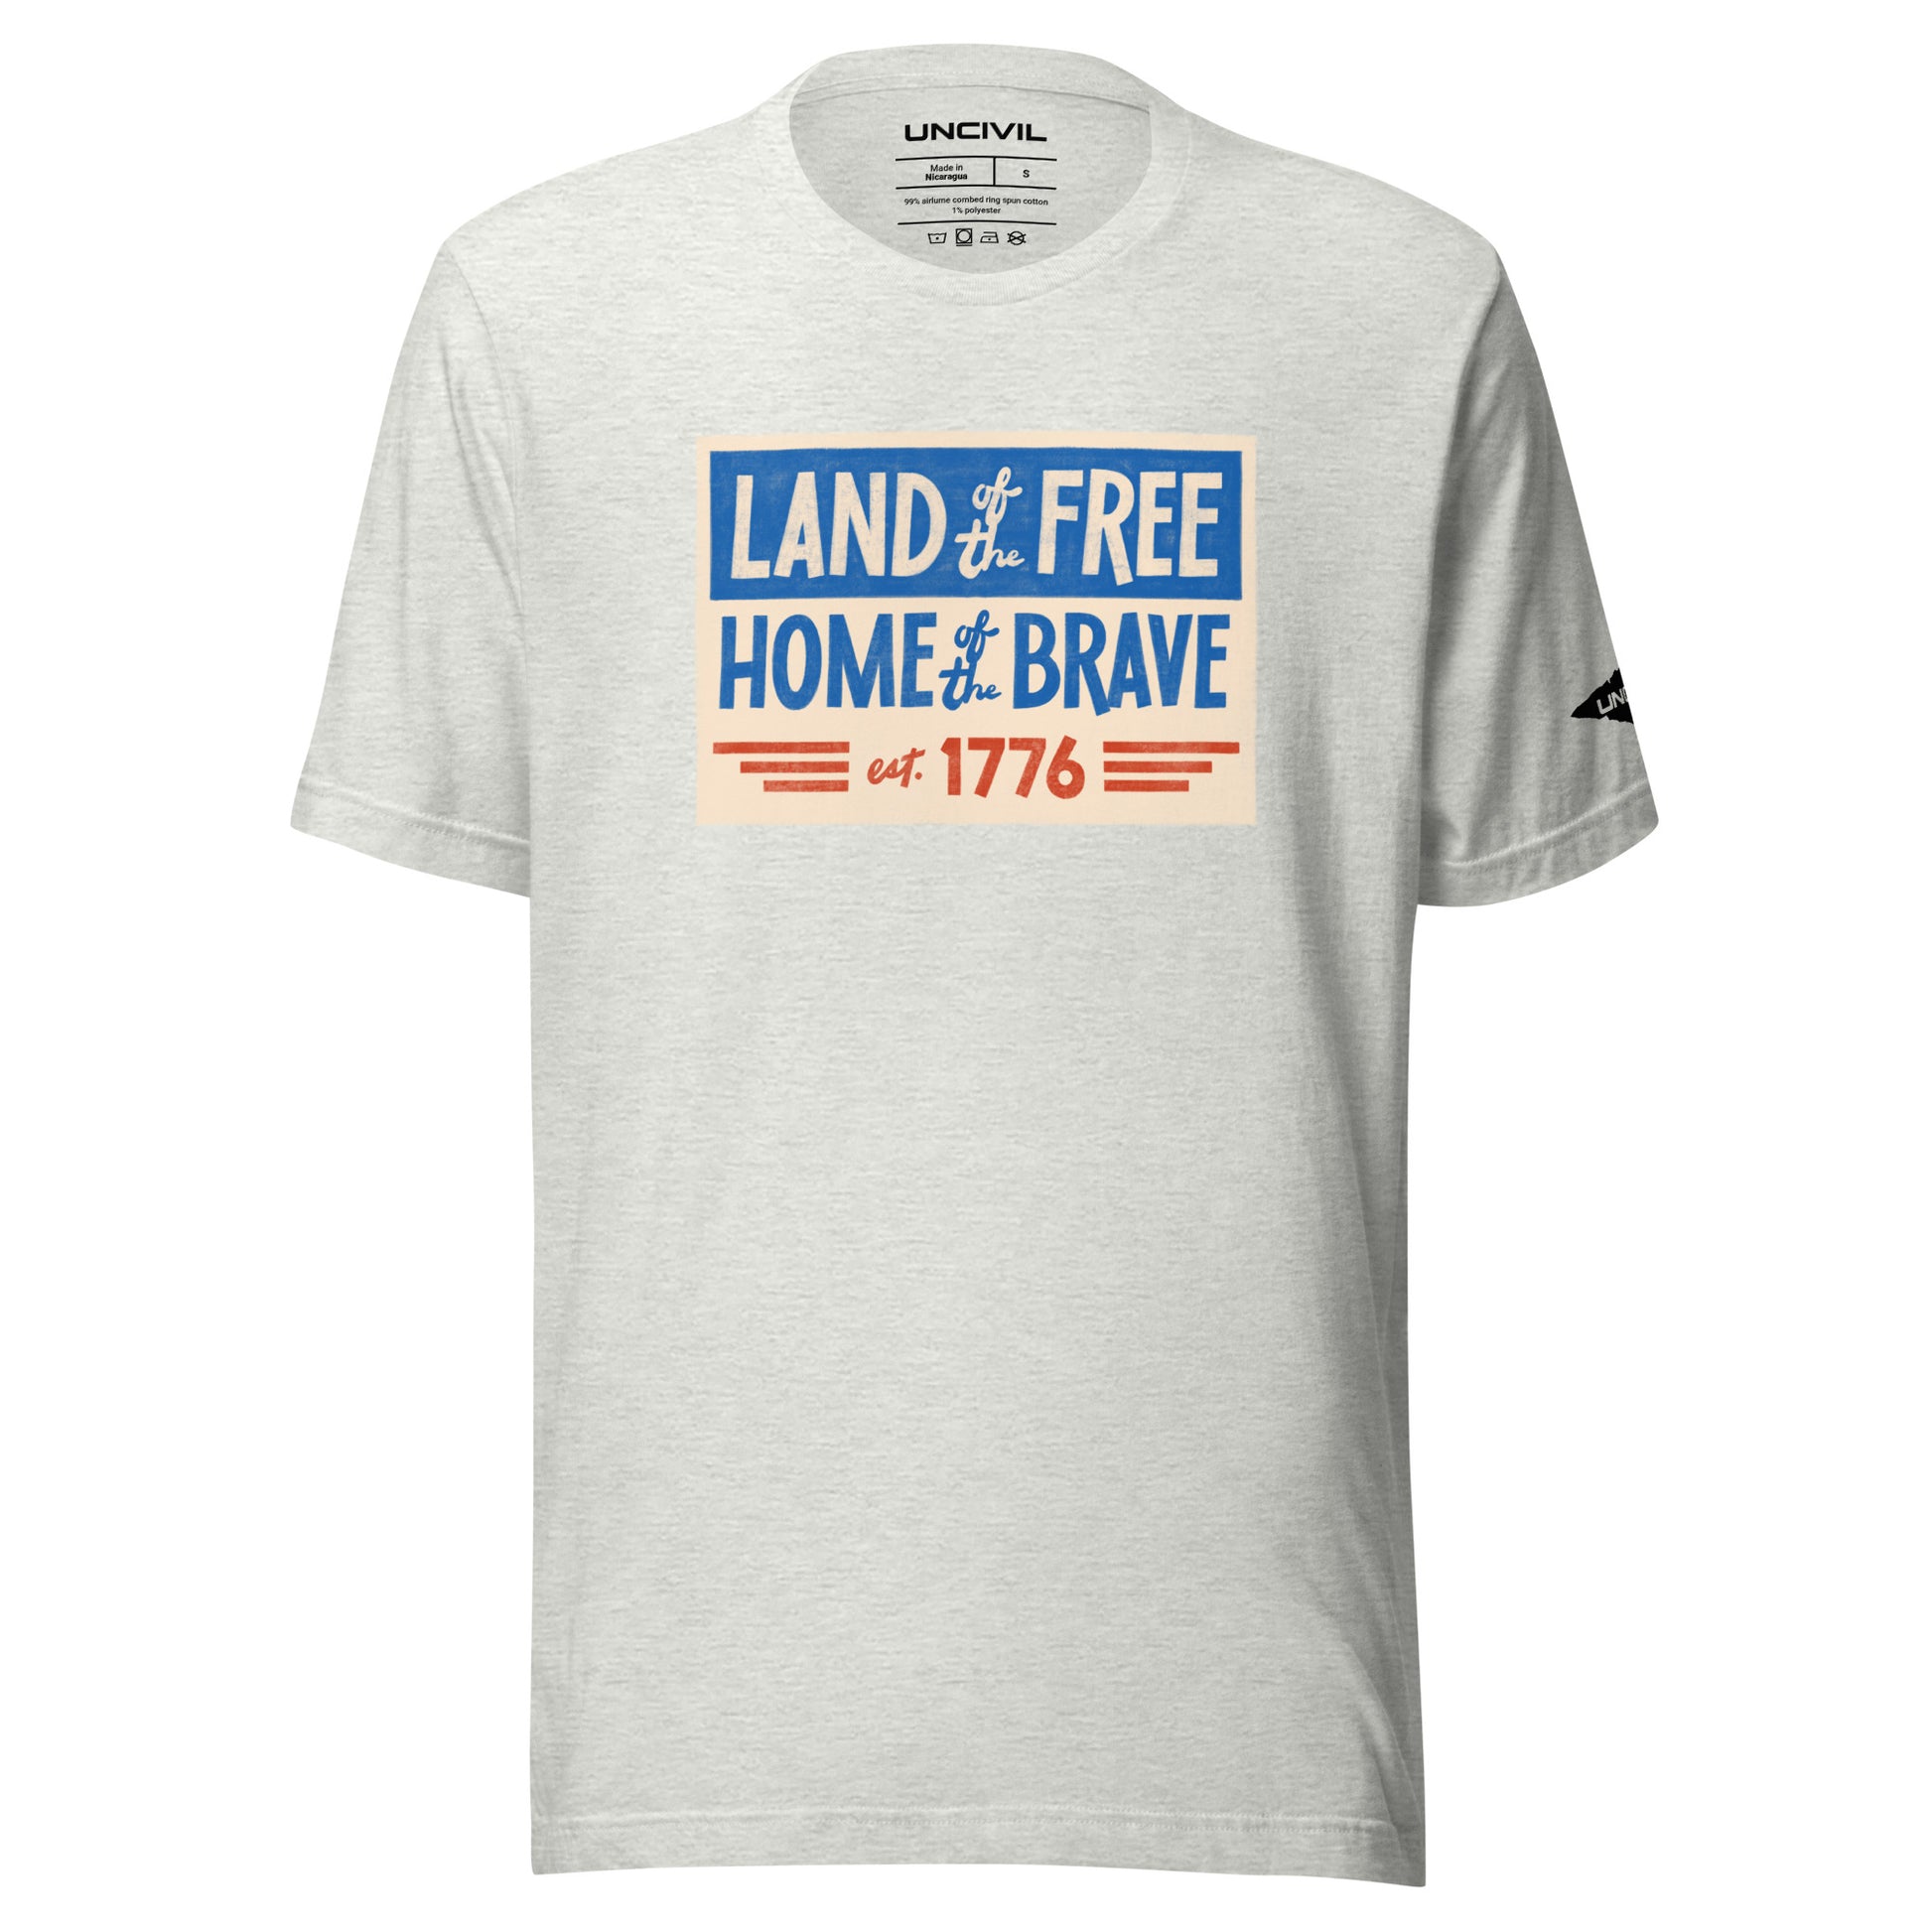 Land of the Free Home of the Brave t-shirt, light grey unisex patriotic shirt.